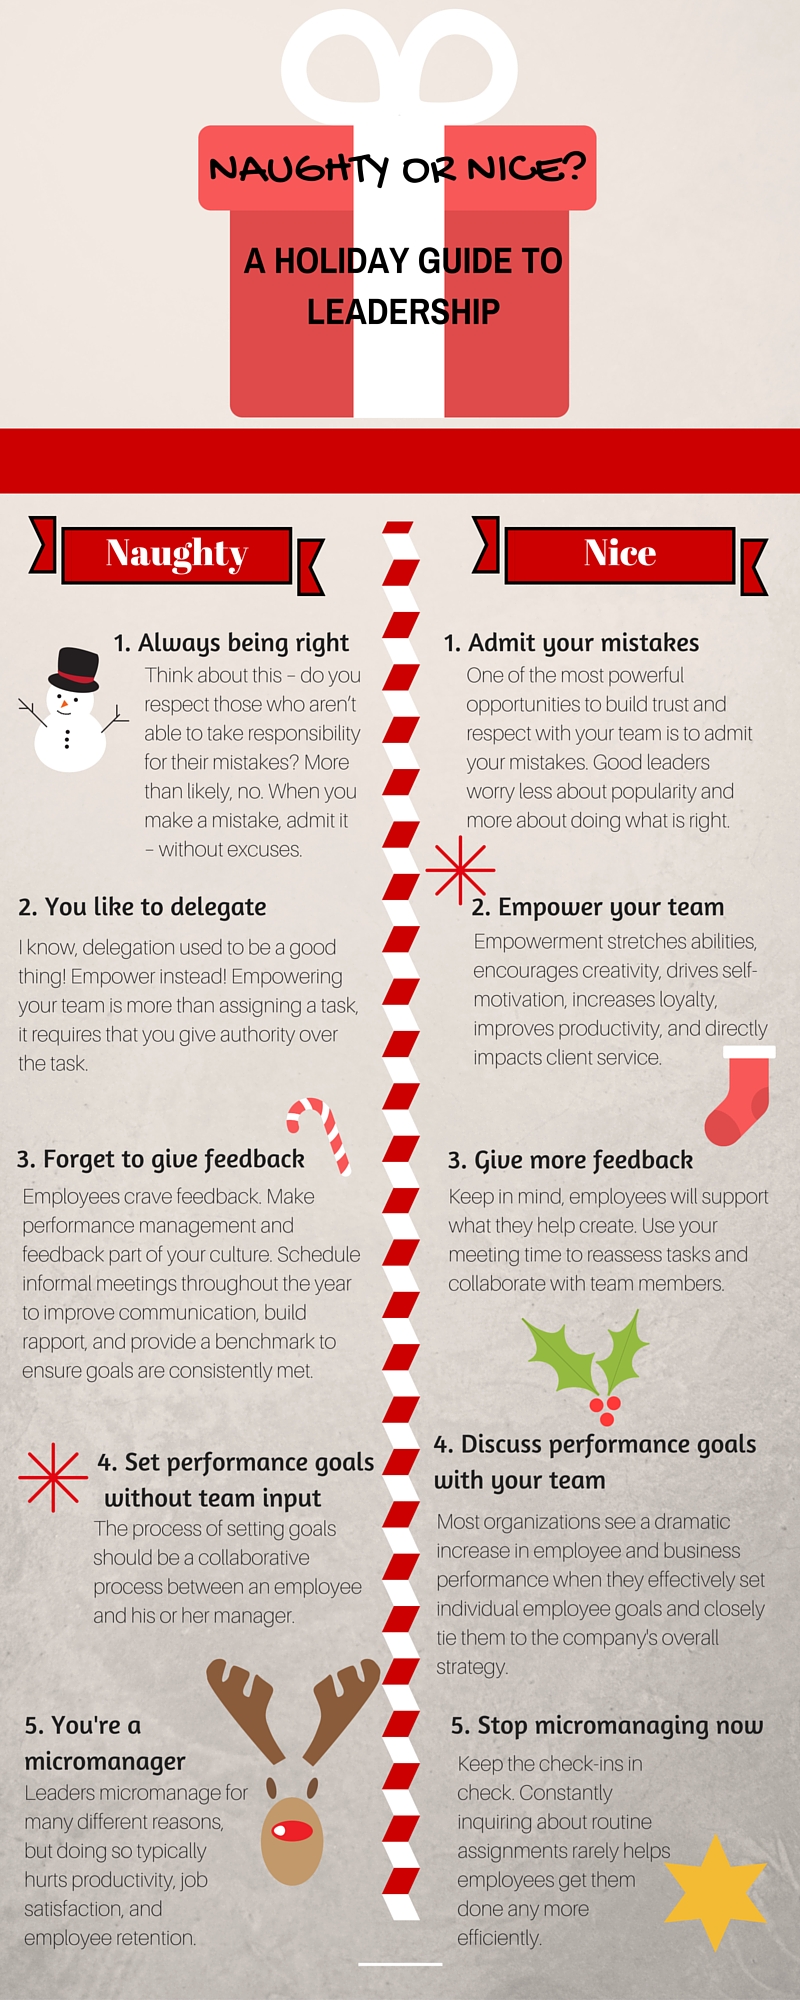 Naughty or Nice - A Holiday Guide To Leadership